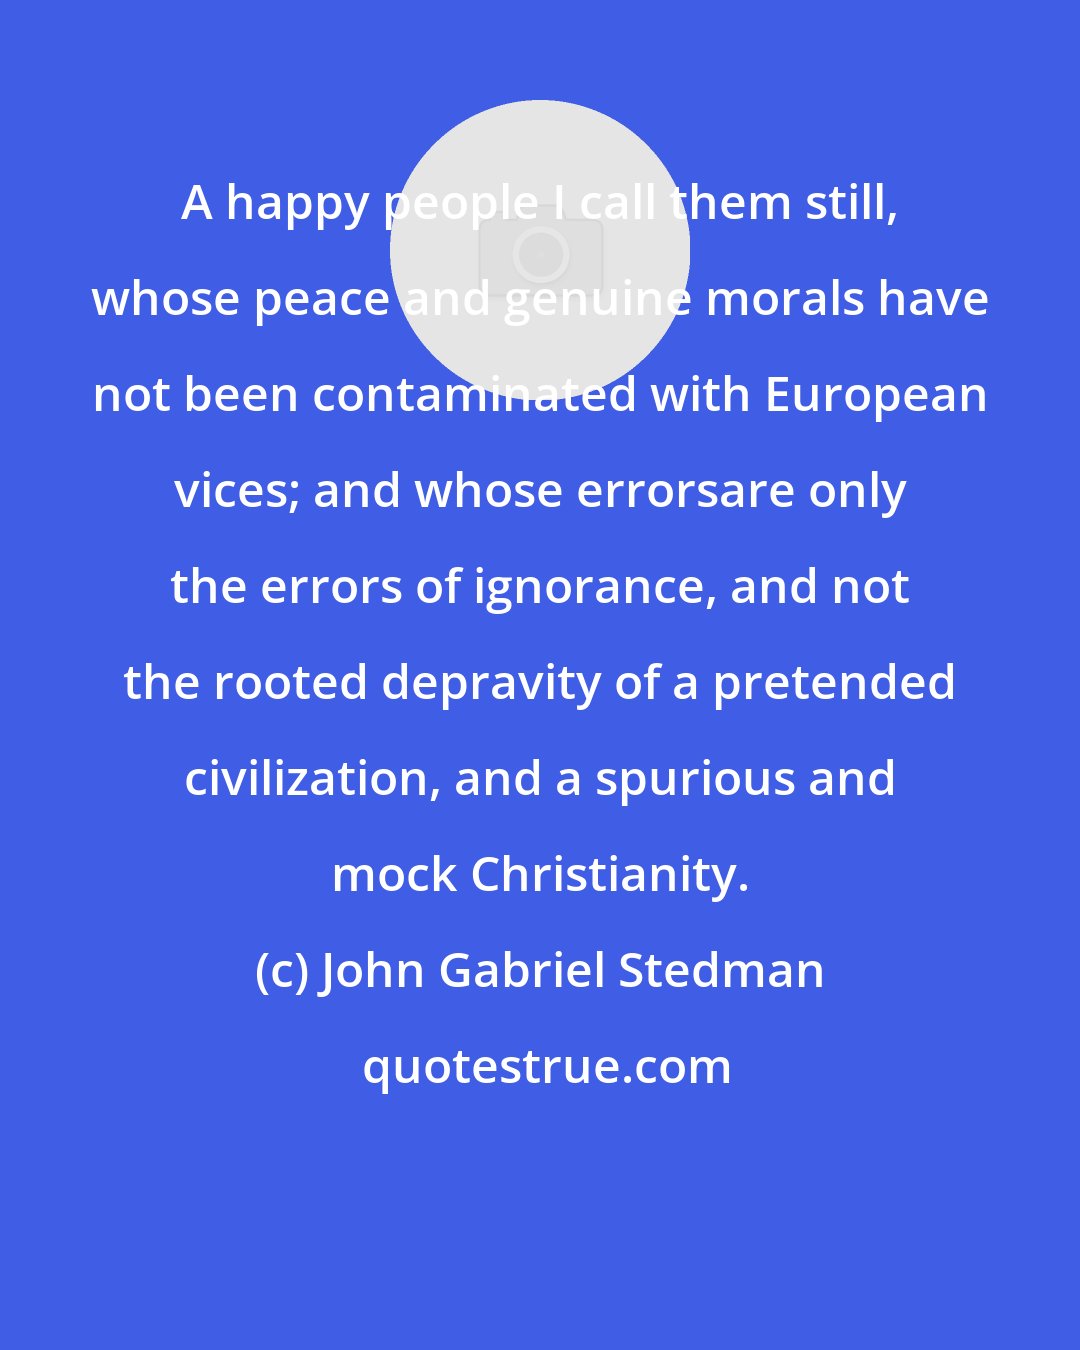 John Gabriel Stedman: A happy people I call them still, whose peace and genuine morals have not been contaminated with European vices; and whose errorsare only the errors of ignorance, and not the rooted depravity of a pretended civilization, and a spurious and mock Christianity.